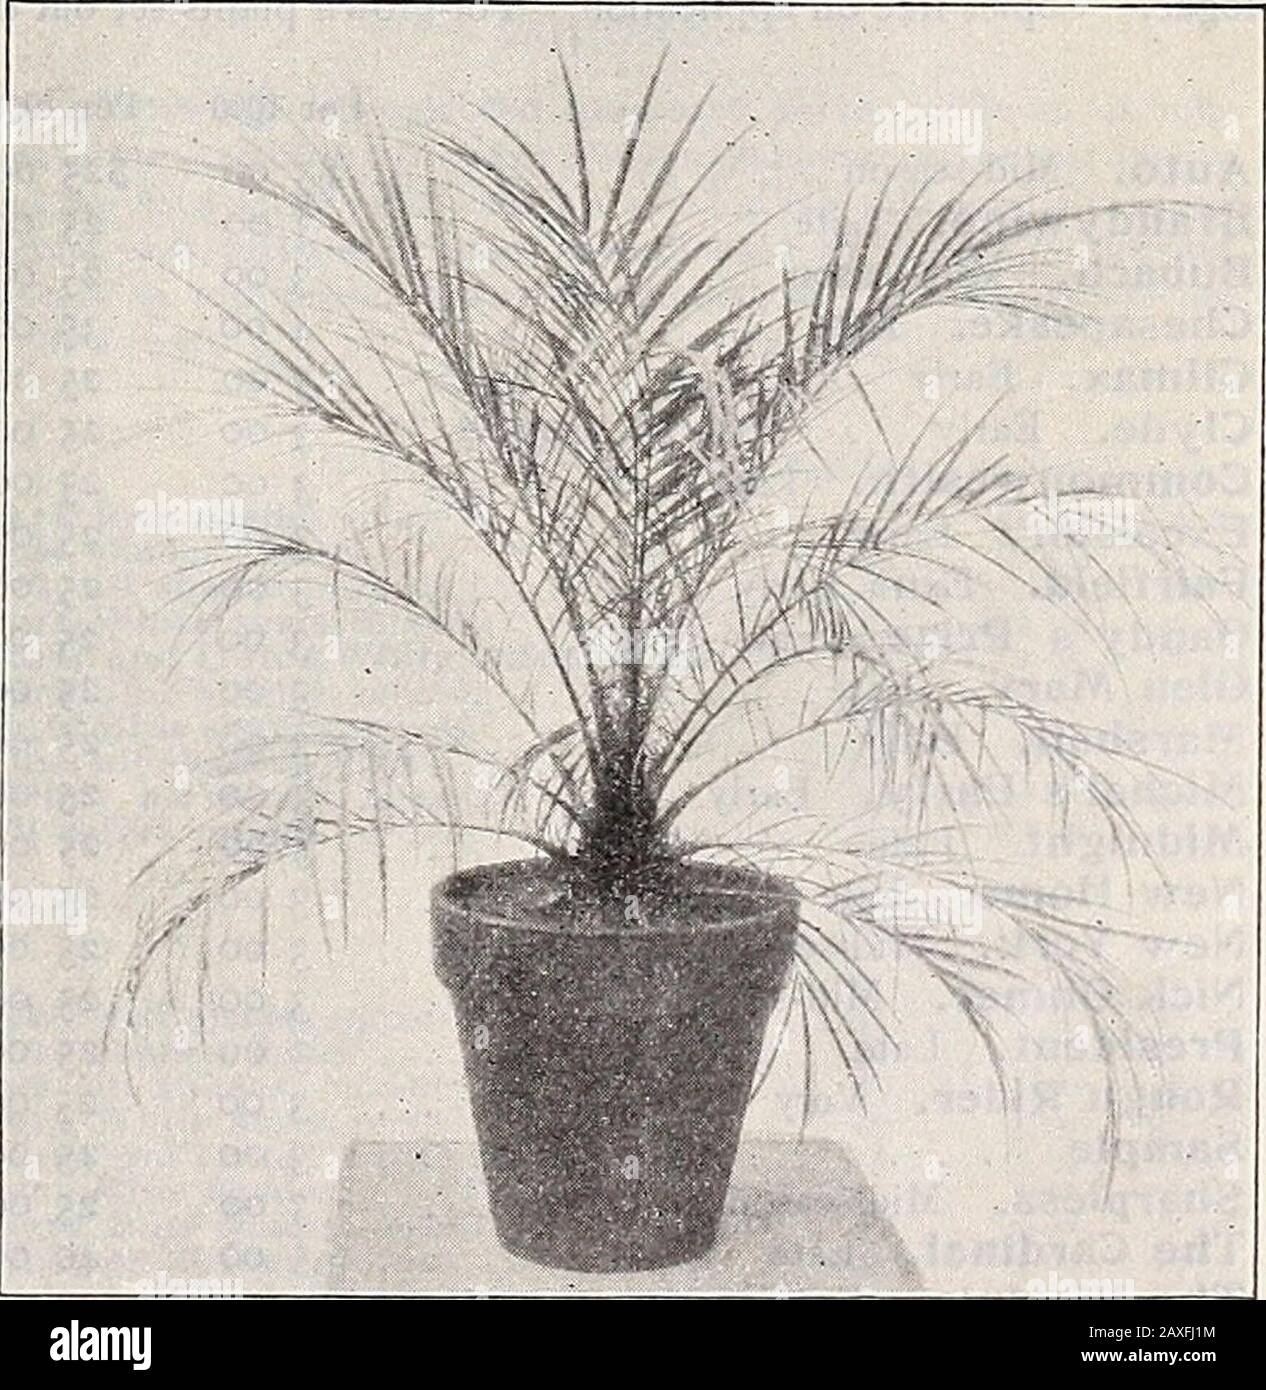 Dreer's wholesale price list 1907 : bulbs plants seasonable flower and vegetable seeds fertilizers, tools, etc., etc . LATANIA BORBONICA A M.AliK-UP PLANT OF KhNTIA Rhapis Fiabelliformis. 8-inch tubs, bushy plants, 2I4 to 3 feet high, S3.00 each.We also offer two exceptionally fine specimen plants 5 feet high and6 feet in diameter. A beautiful pair of bushy plants, $150.00 each. Stevensonia Grandifolia. A limited stock of this rare and beautiful Stove Palm.6-inch pots $2 50 each Pinanga Kuhlii. Good 3-inch pot plants of this rare Palm 50 cts. each; $5.00 per doz Verschaffeltia 5plendida. A rar Stock Photo